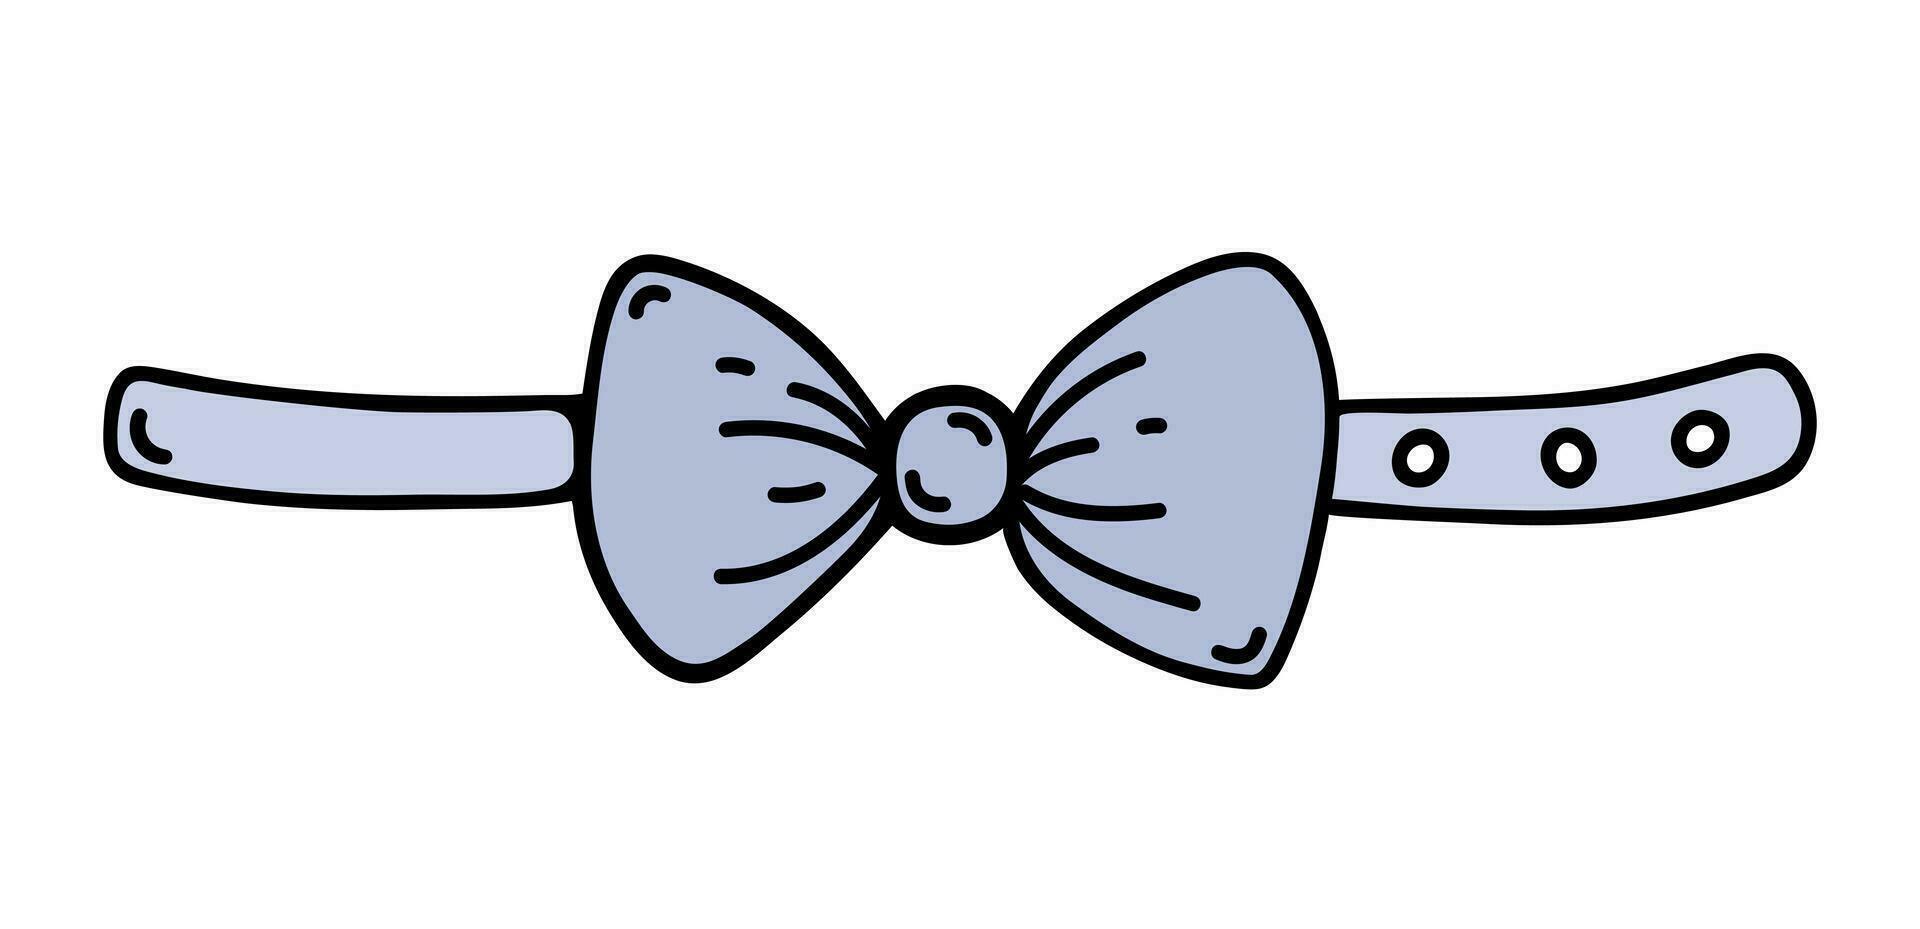 Elegant bow tie vector icon. Stylish gray and blue accessory with ties for a wedding, party, date. Decoration for a classic suit. Hand drawn bright doodle isolated on white. Clipart for print, cards